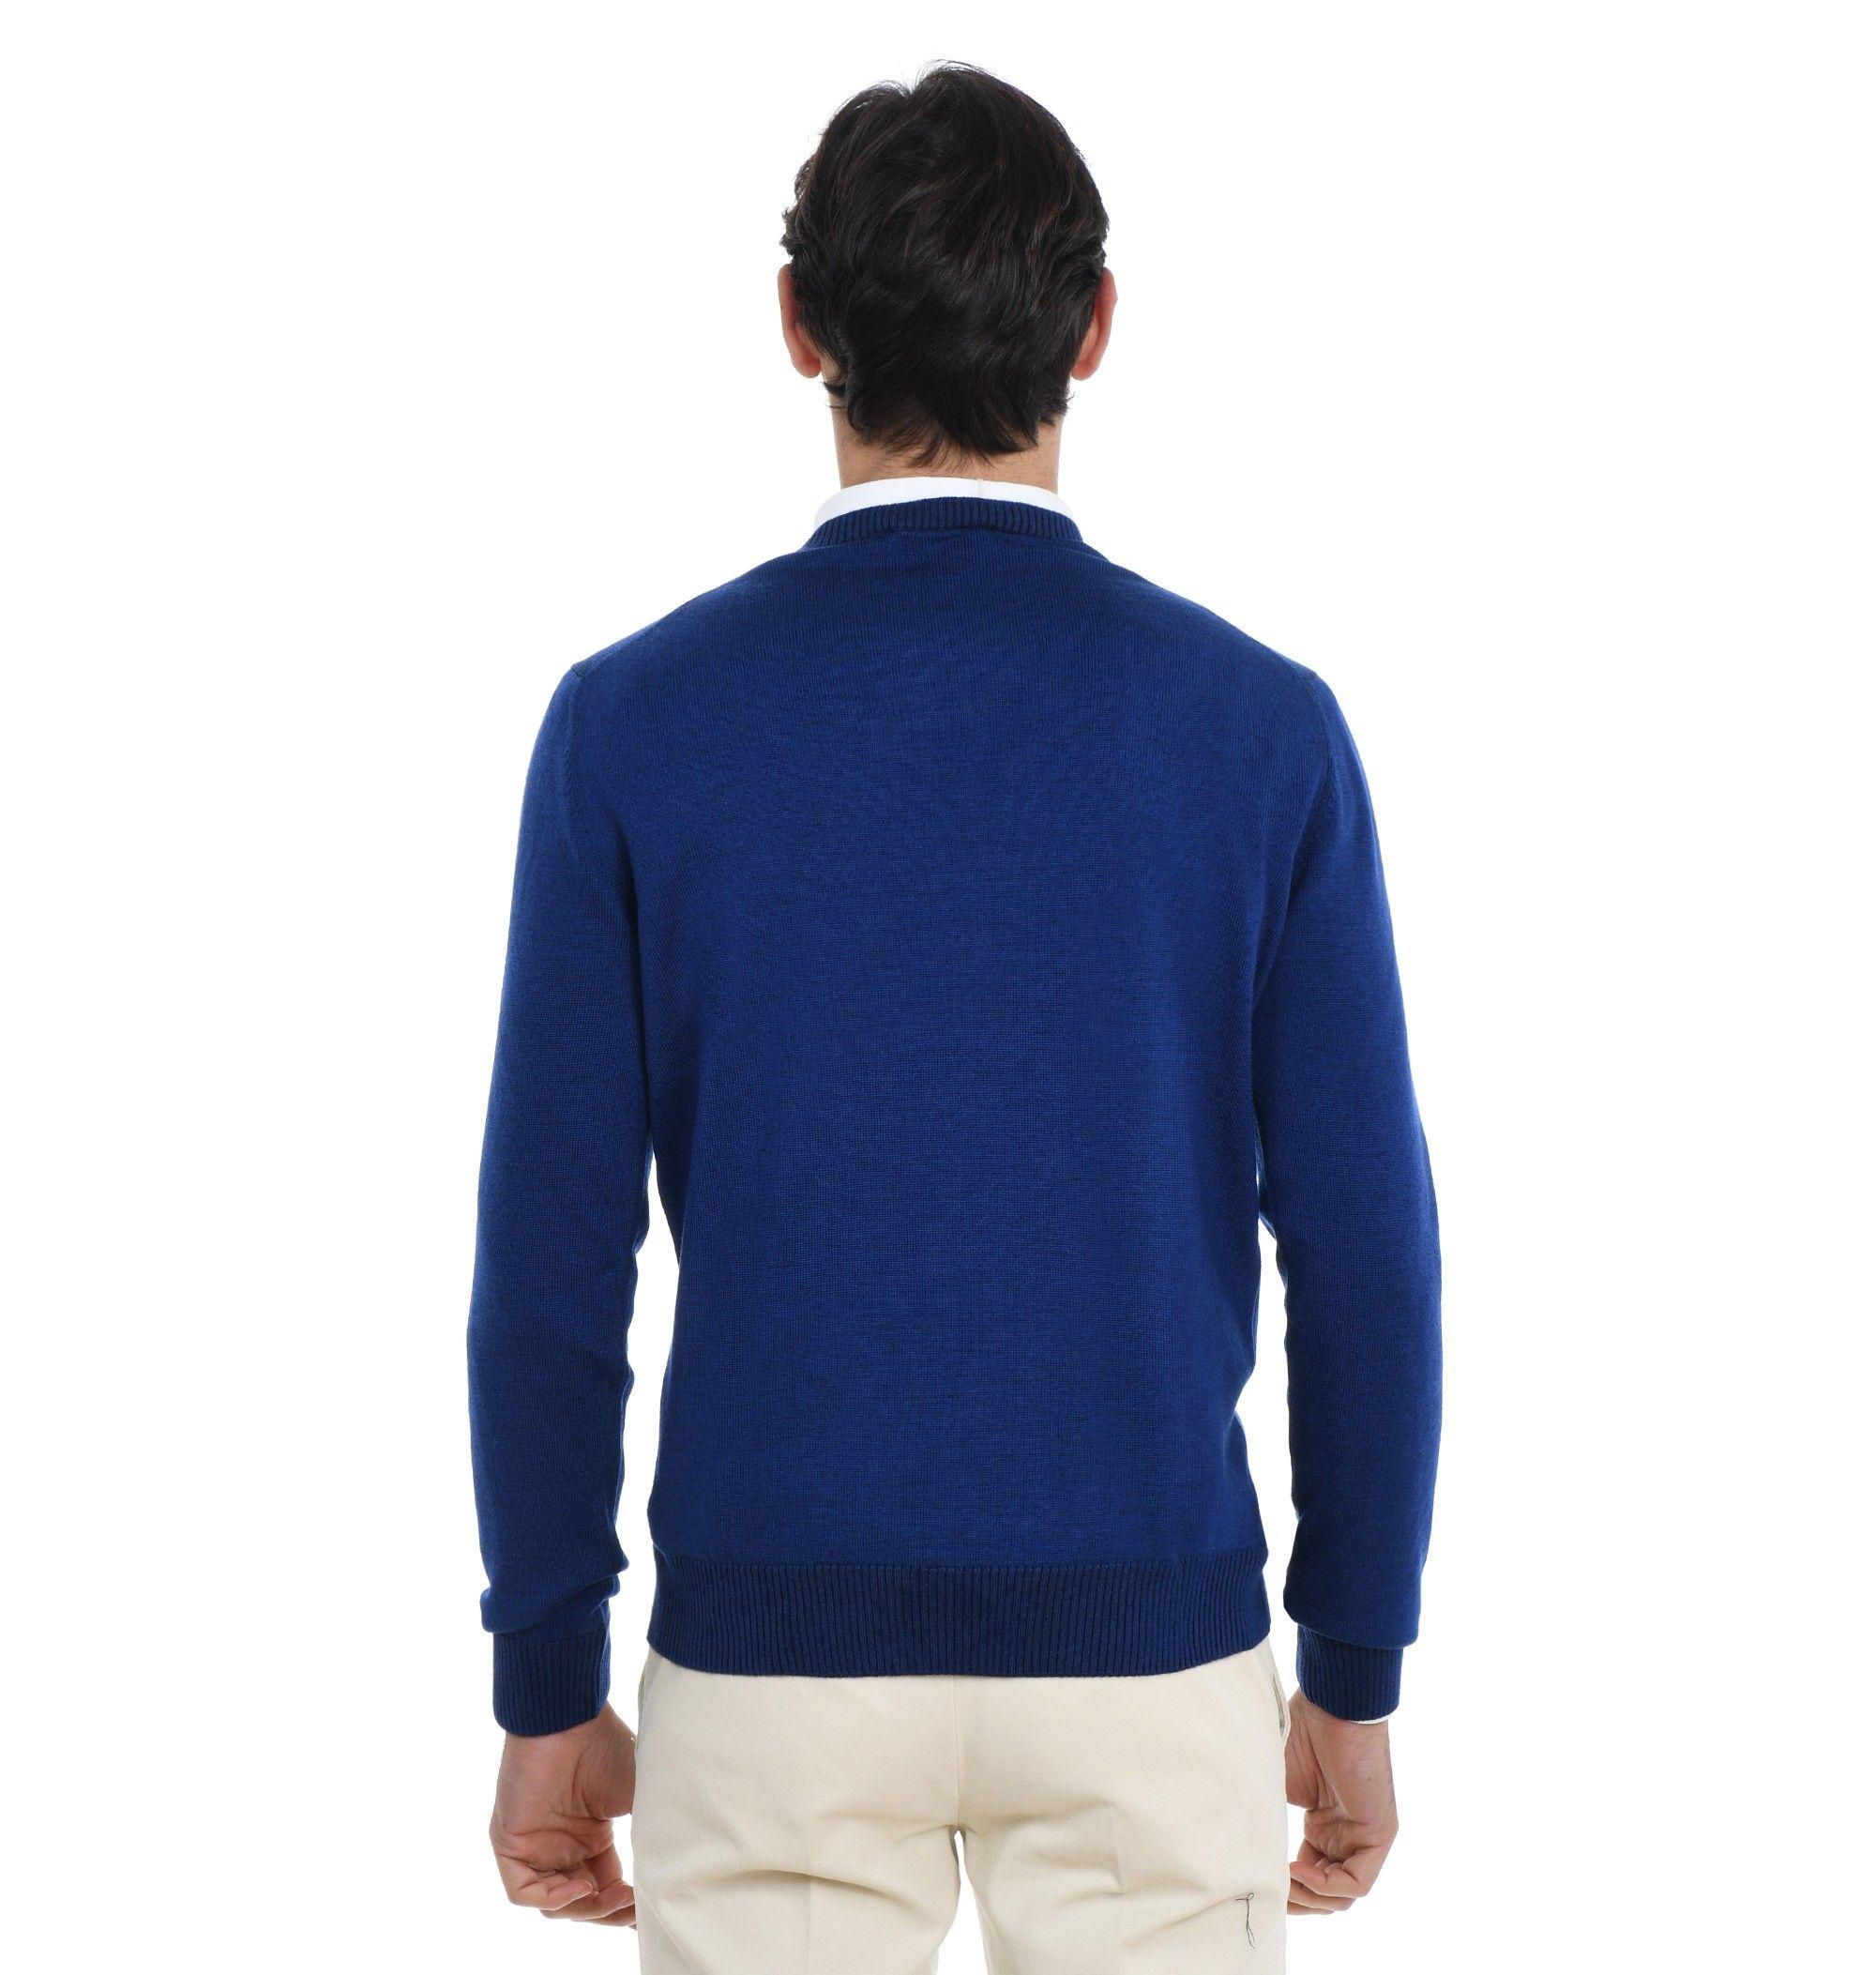 Fay Other Materials Sweater in Blue for Men - Lyst